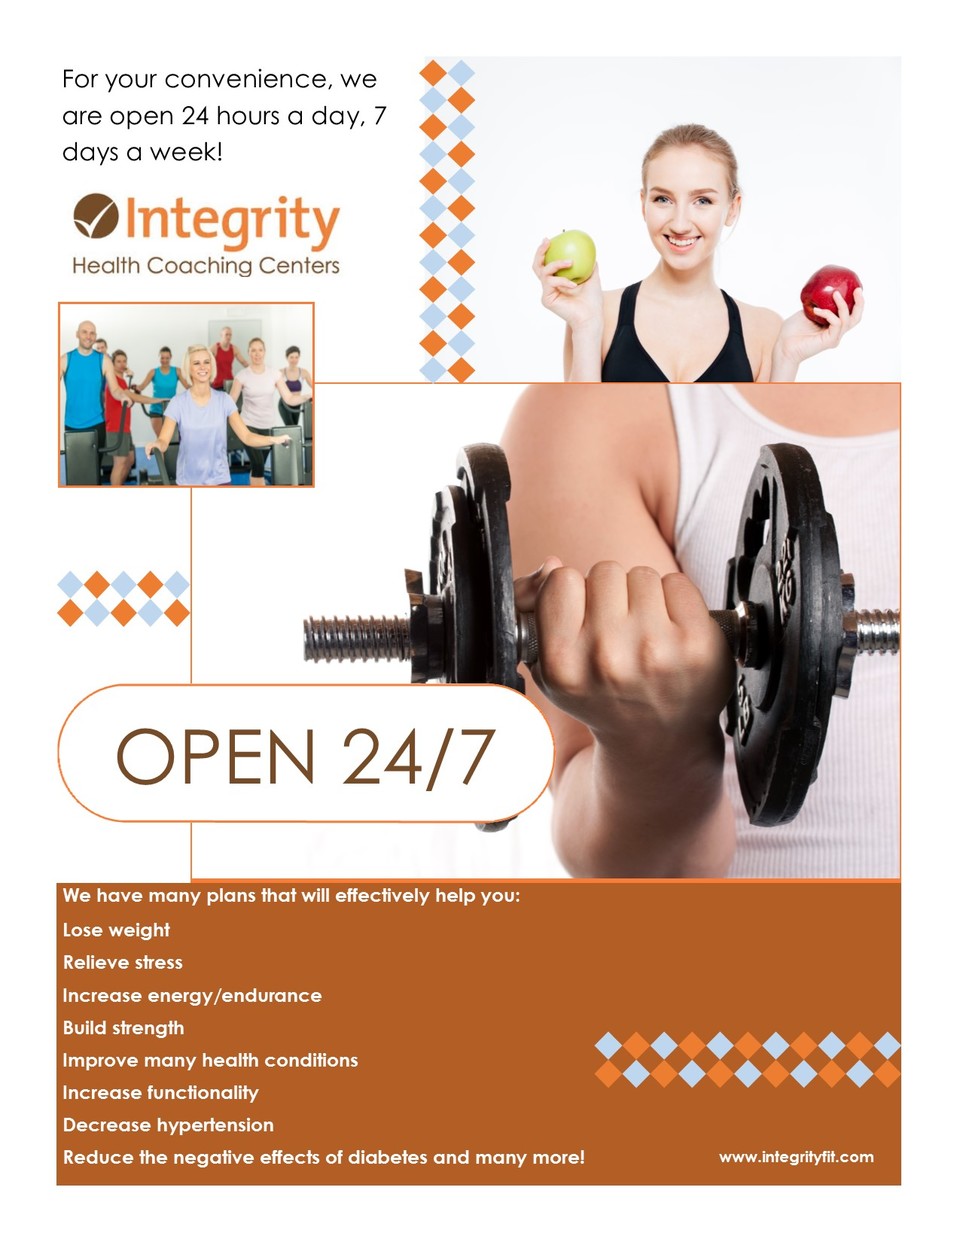 Integrity Health Coaching Centers in NH!